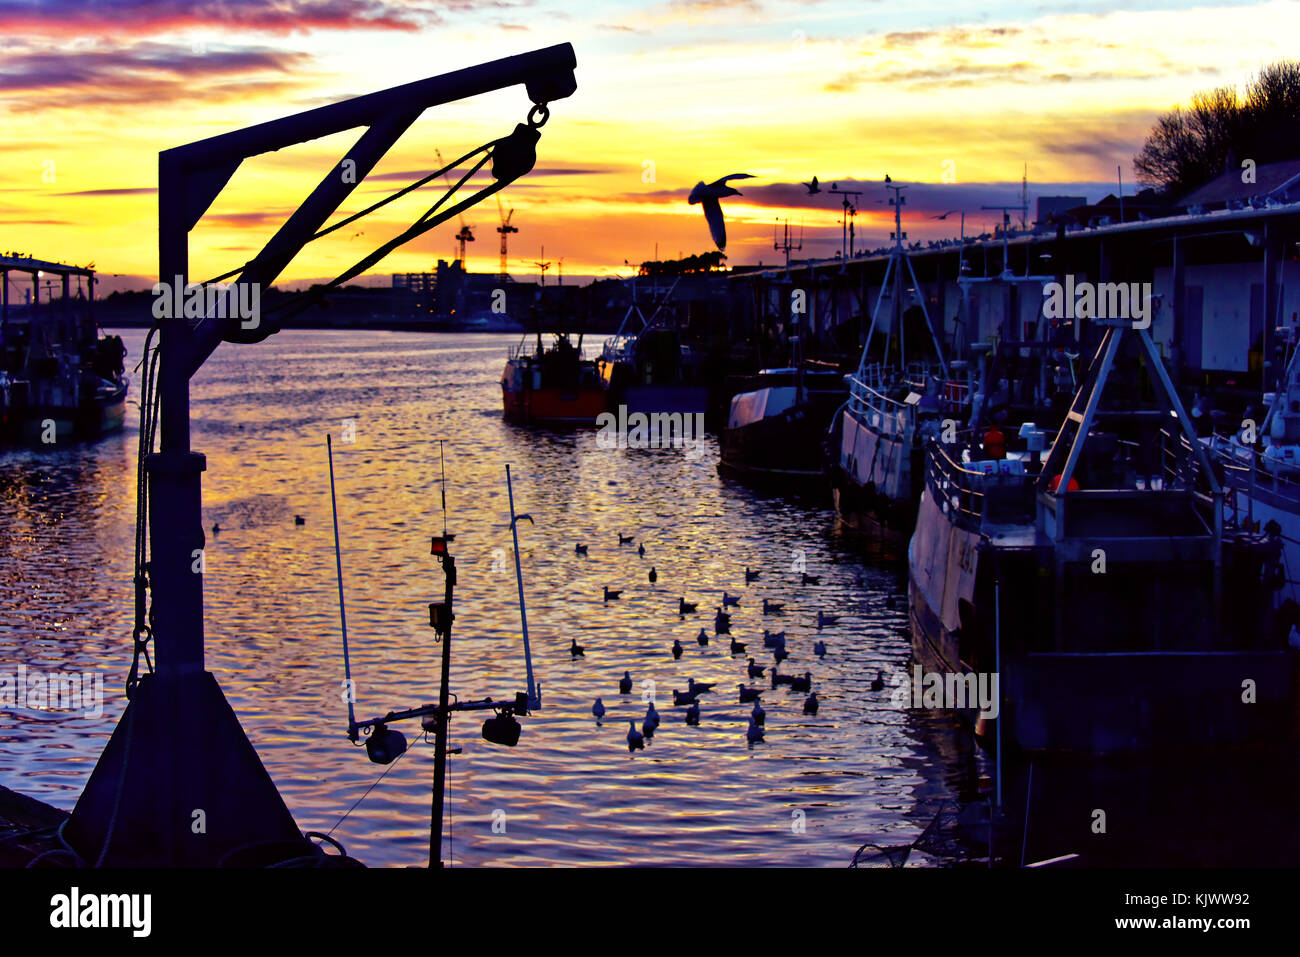 north-shields-fish-quay-and-seagulls-feeding-off-the-boats-at-sunset-KJWW92.jpg